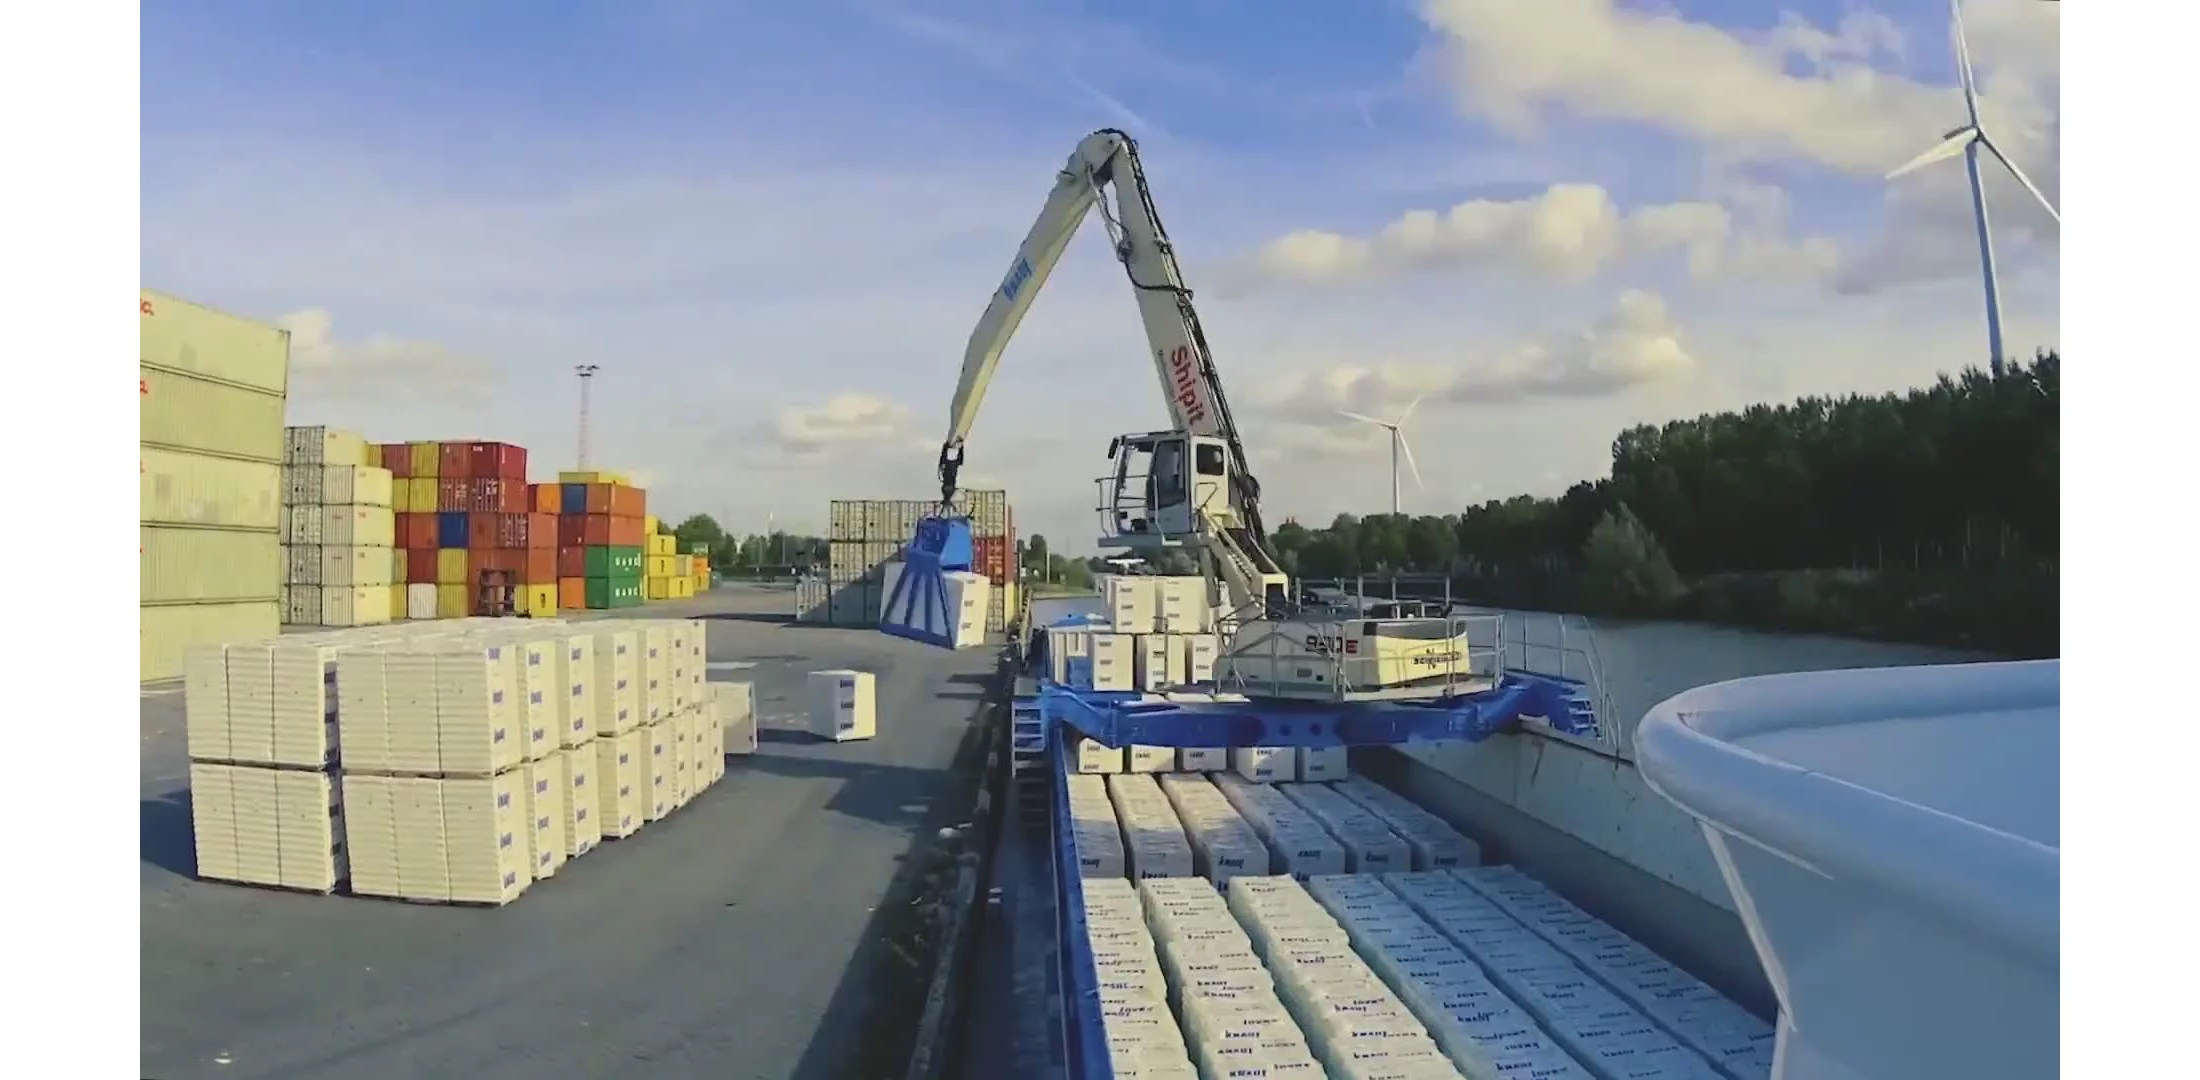 GY_BE (NL) boottransport_knauf_blue (1080p)